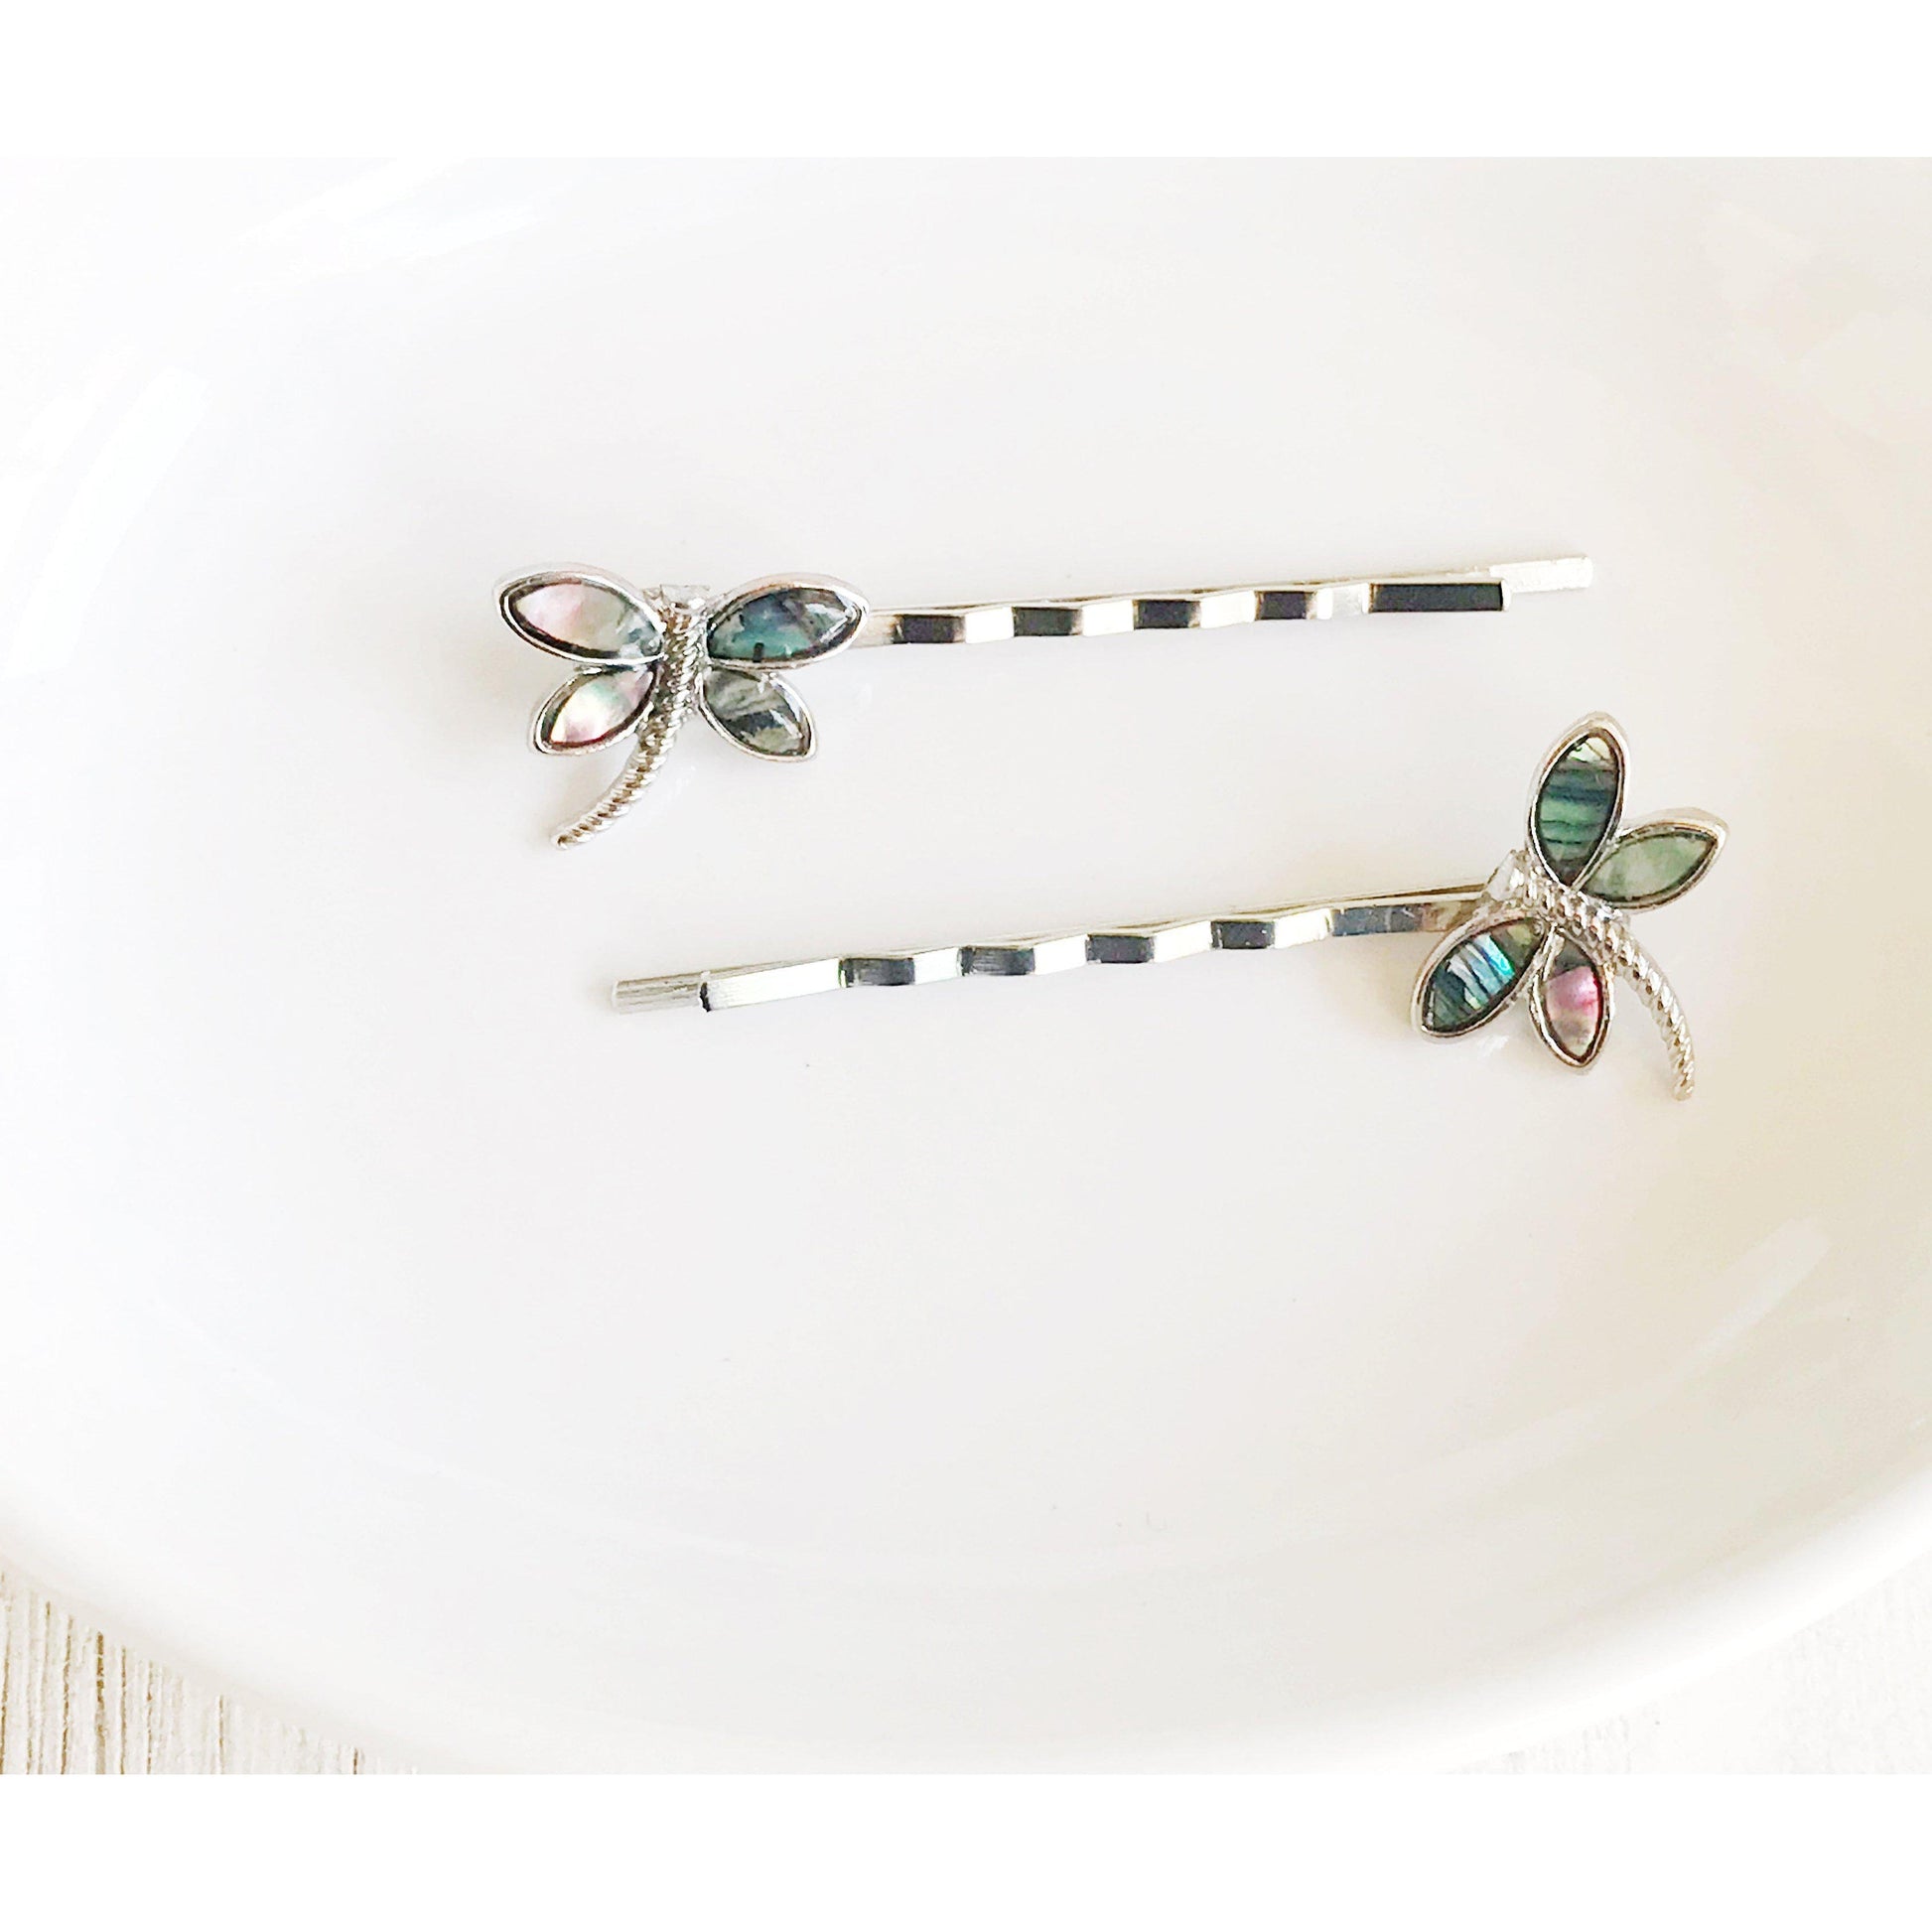 Women's Natural Shell Abalone Dragonfly Bobby Pin Hair Accessories - Exquisite Nature-Inspired Styling